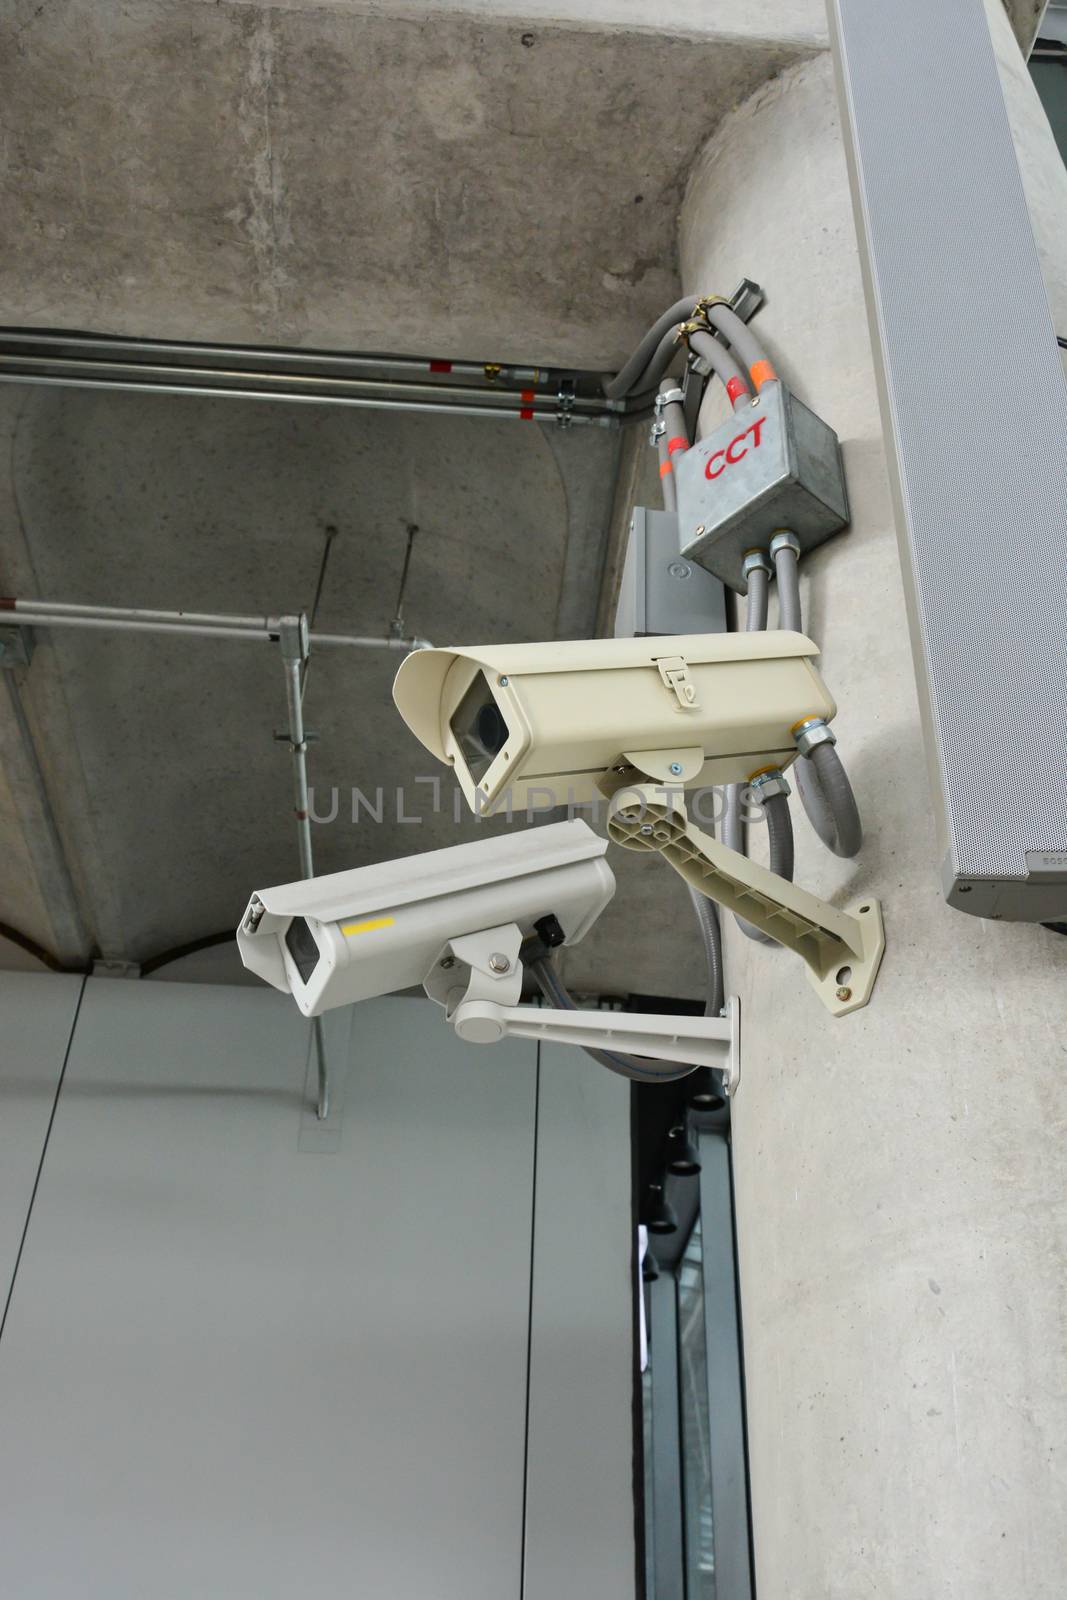 CCTV camera or surveillance operating with electric door in back